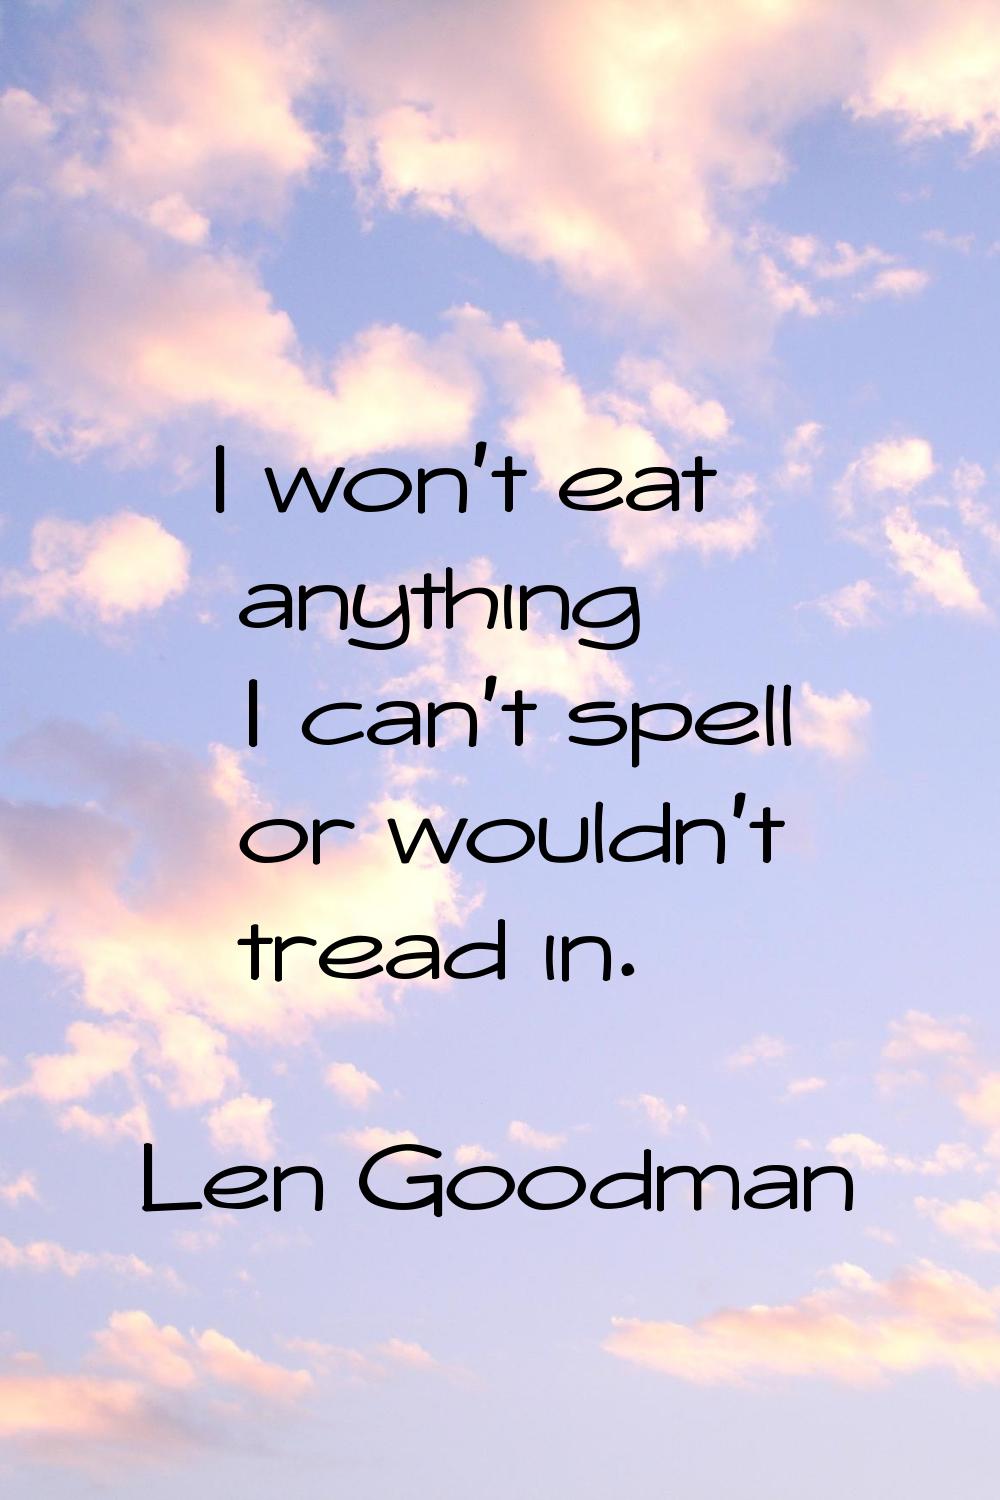 I won't eat anything I can't spell or wouldn't tread in.